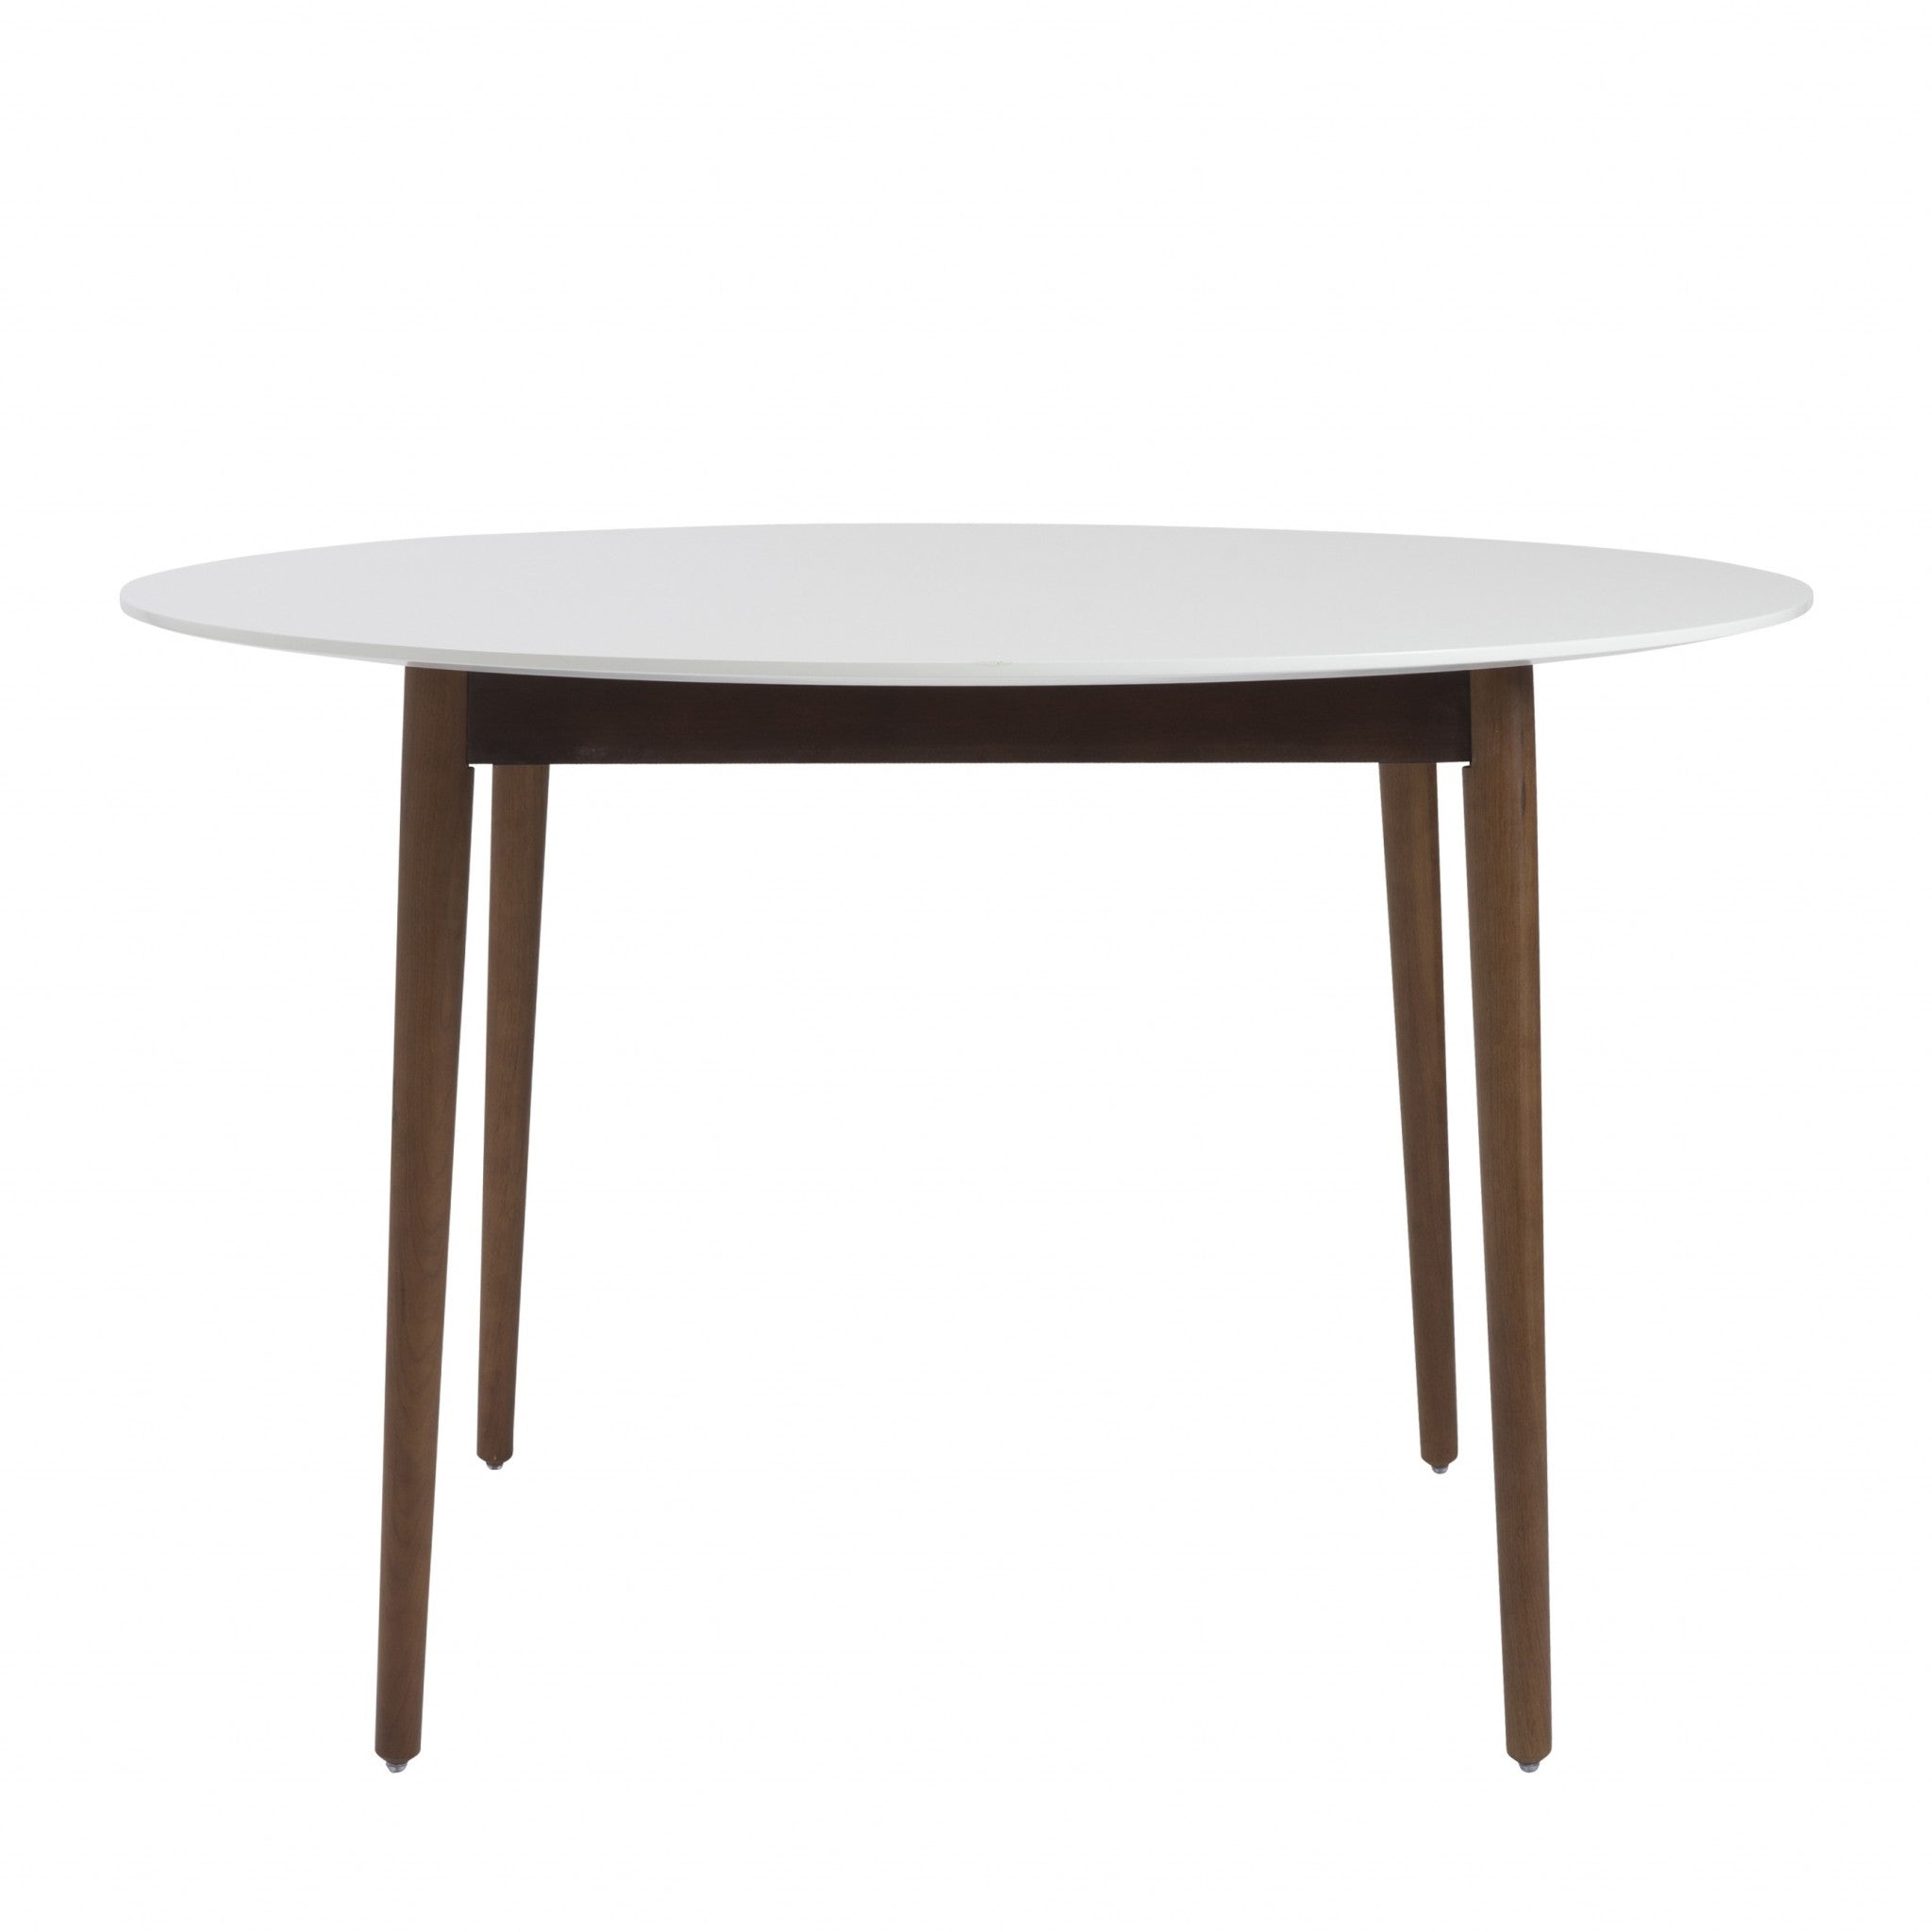 Round White and Brown Wooden Table